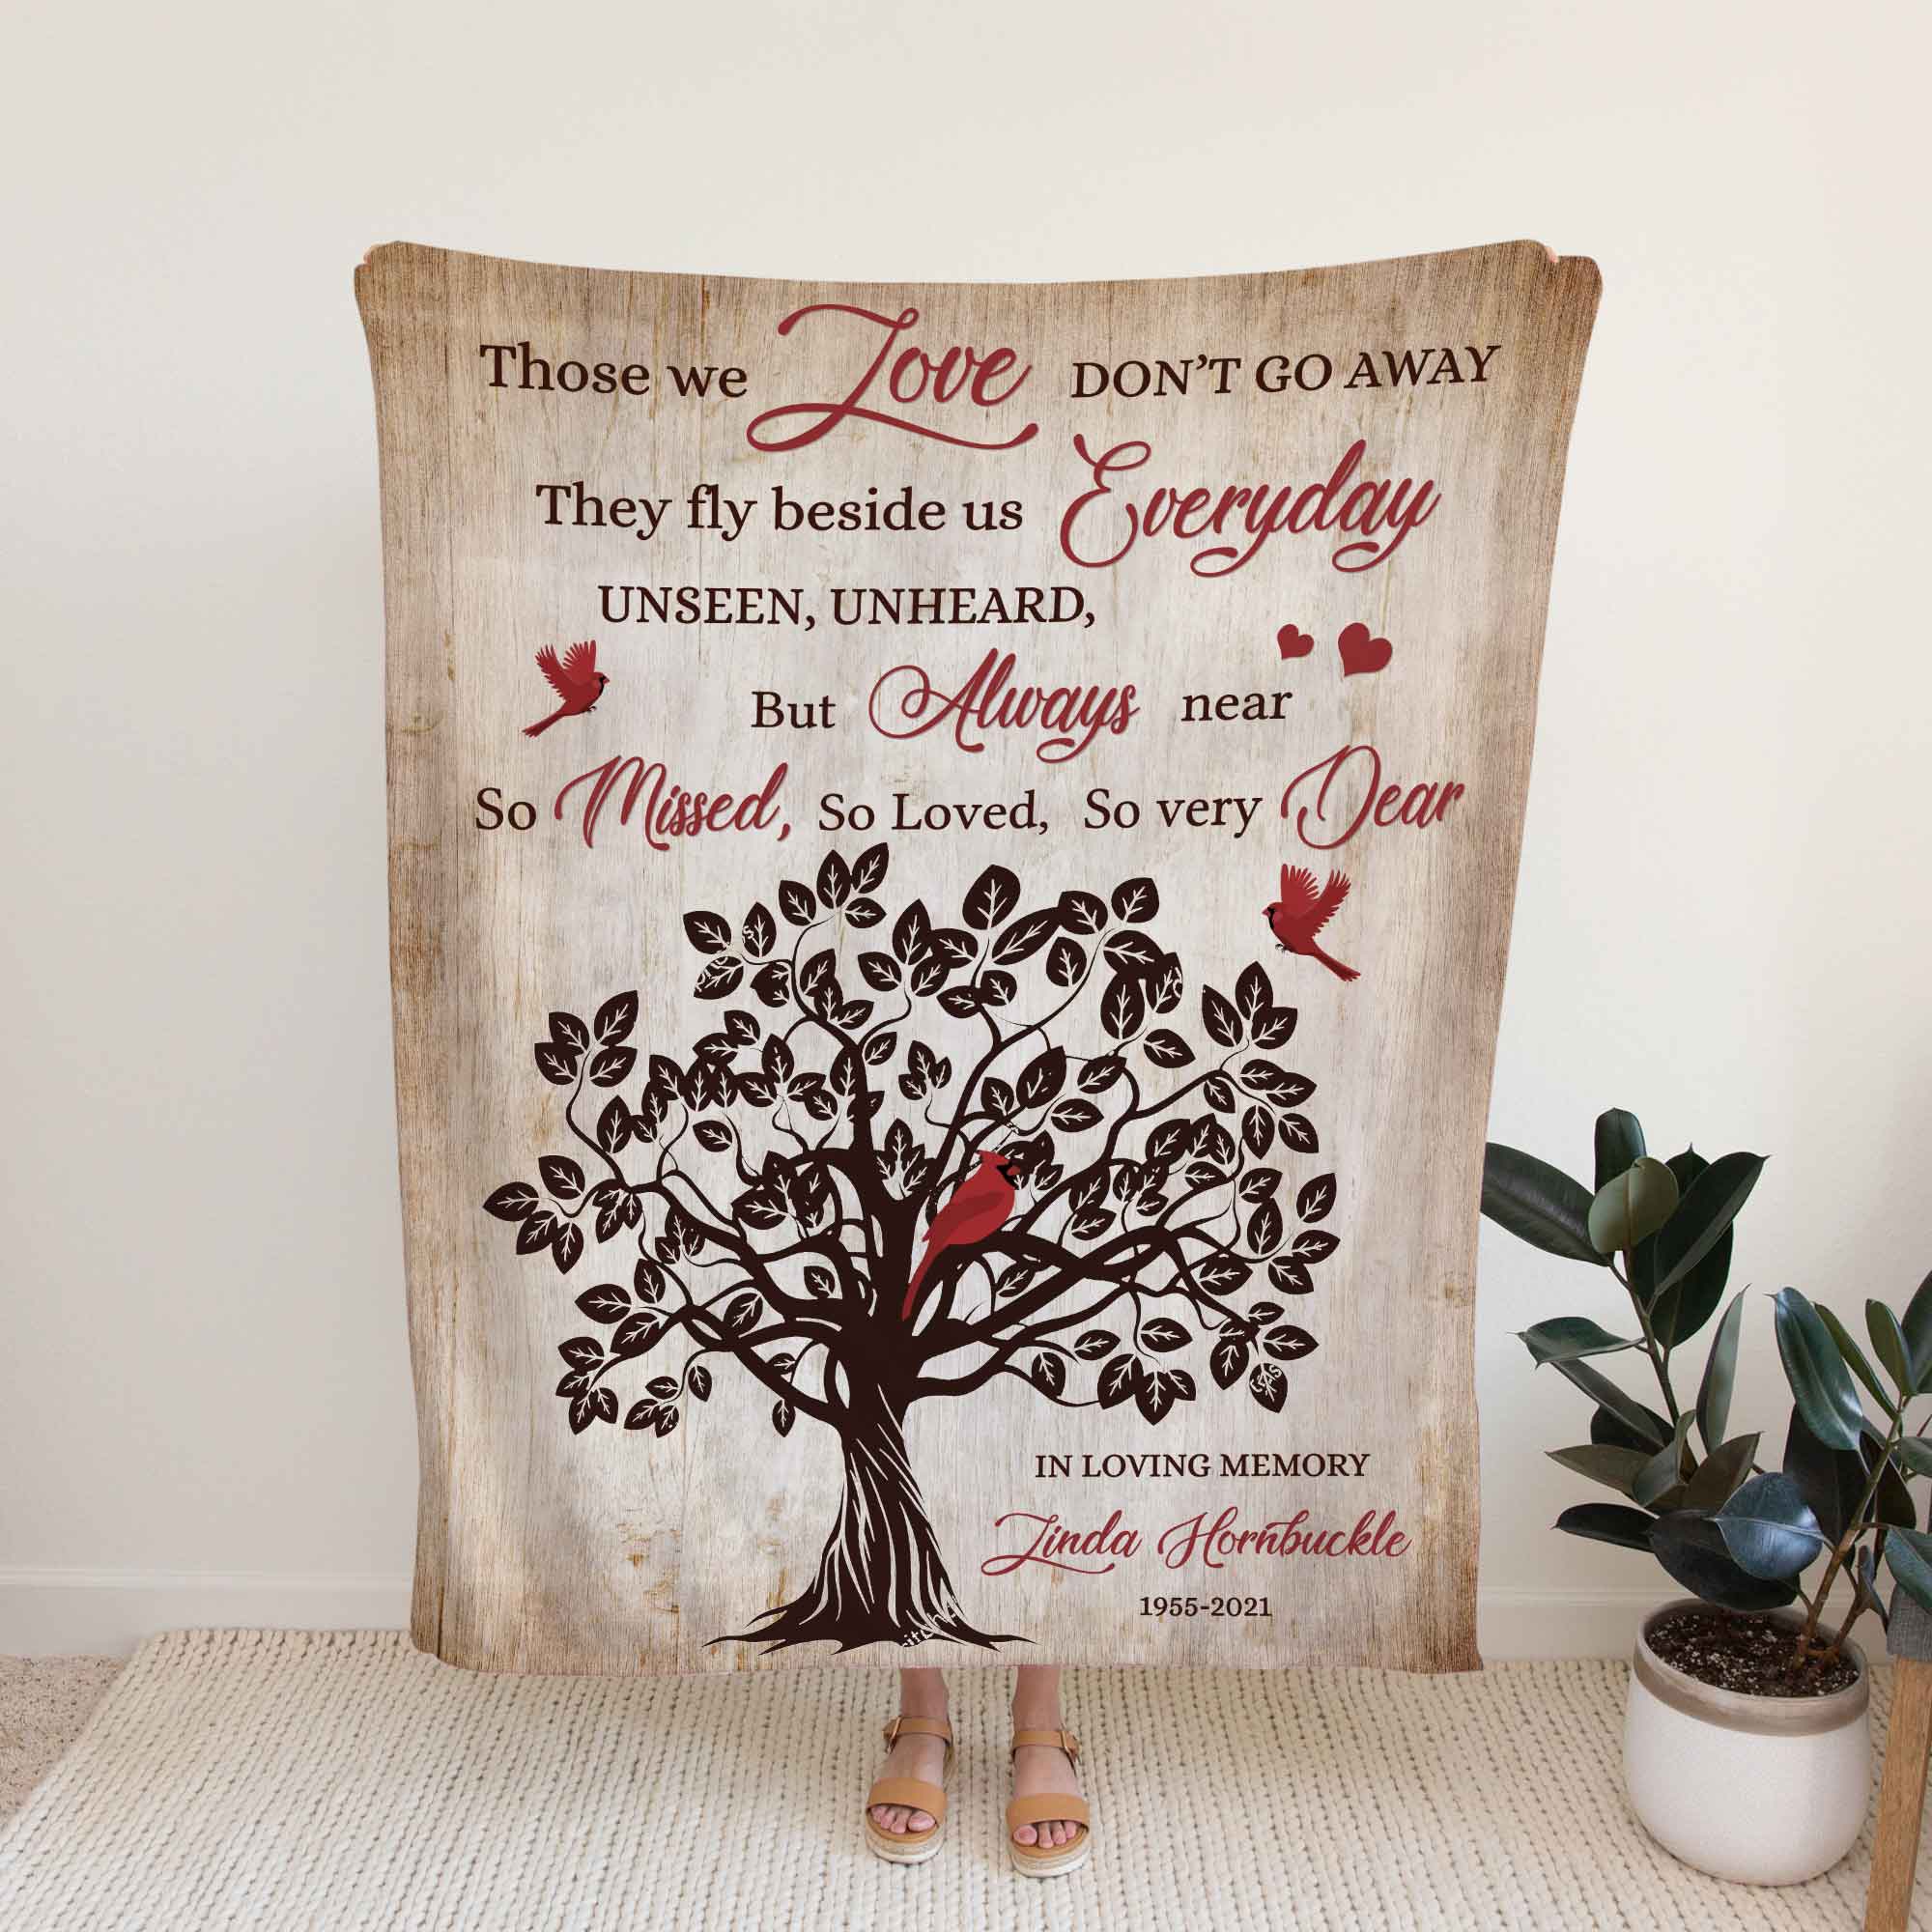 Personalized Memorial Blankets For Funeral, Those We Love Don't Go Away Sympathy Blankets, Keepsake Blankets